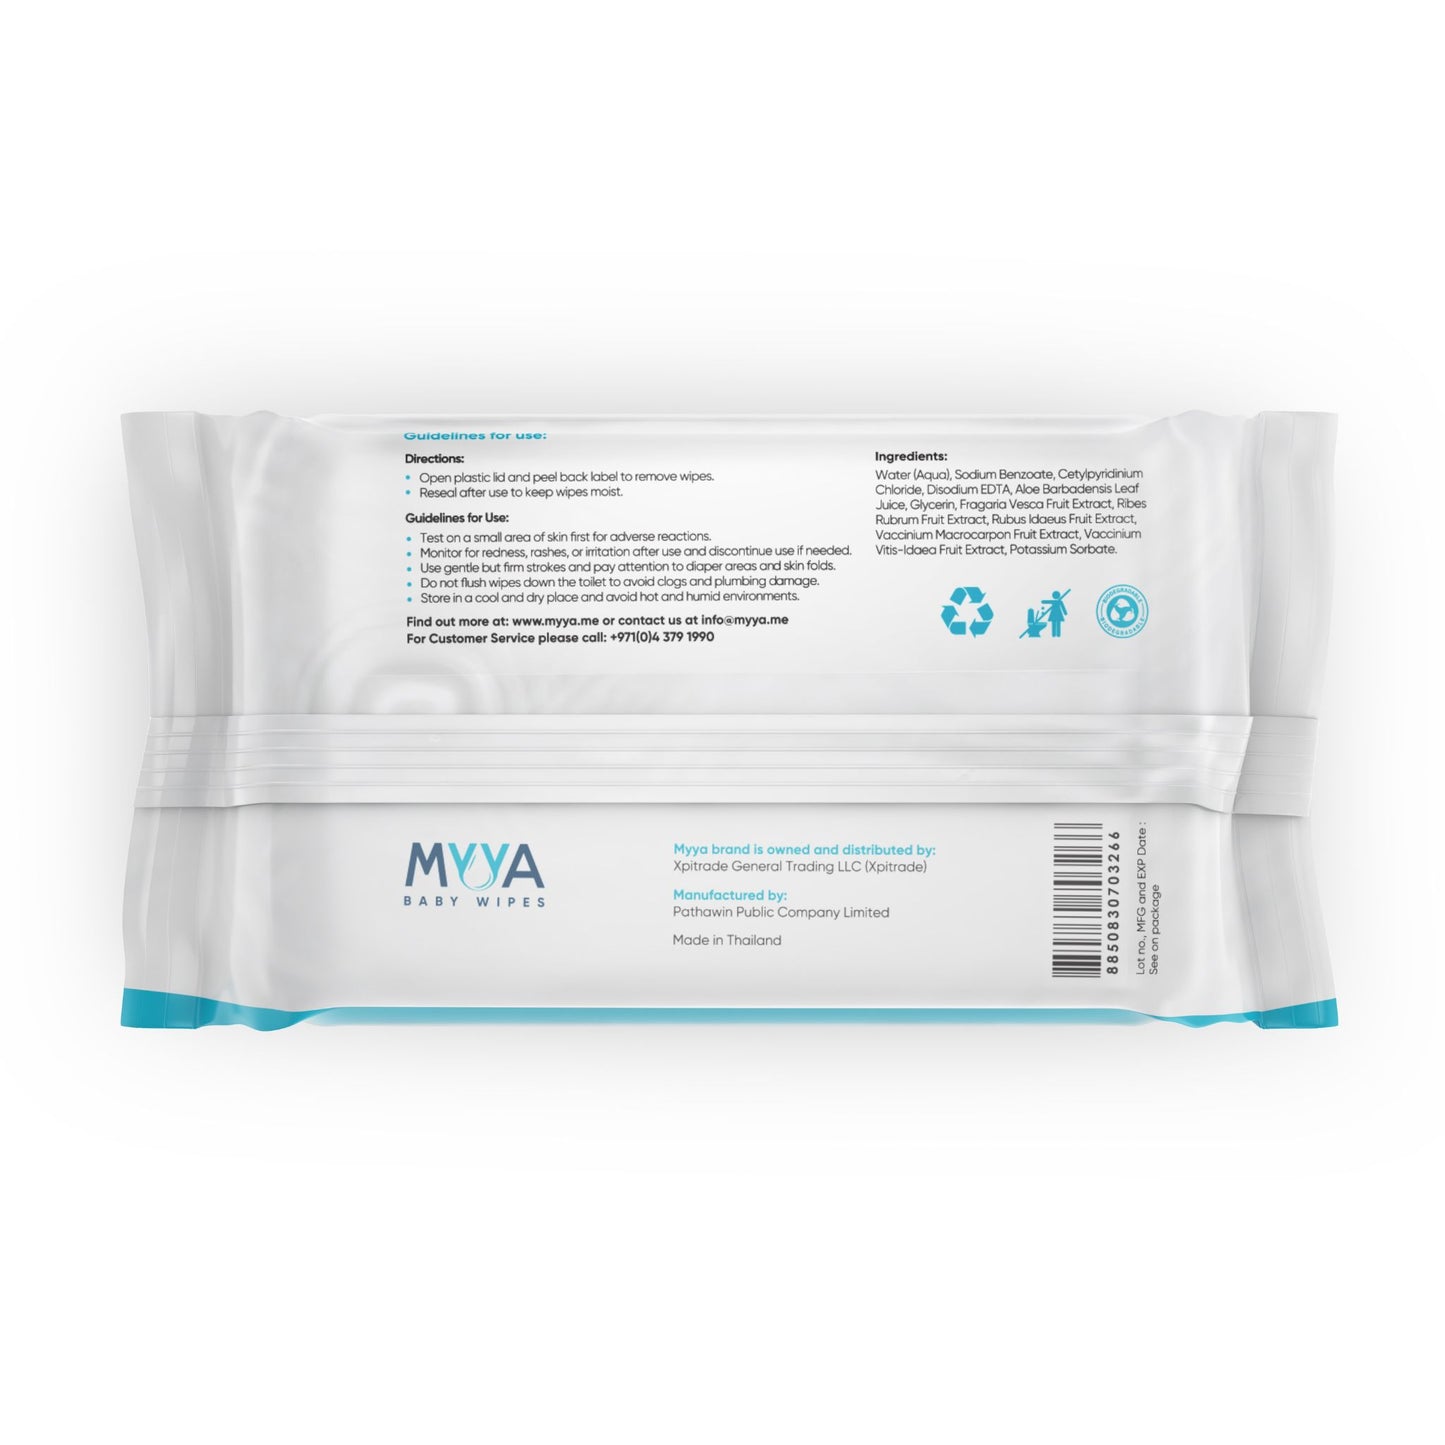 80 Sheet Count of Myya Baby Wipes for Face and Body Use